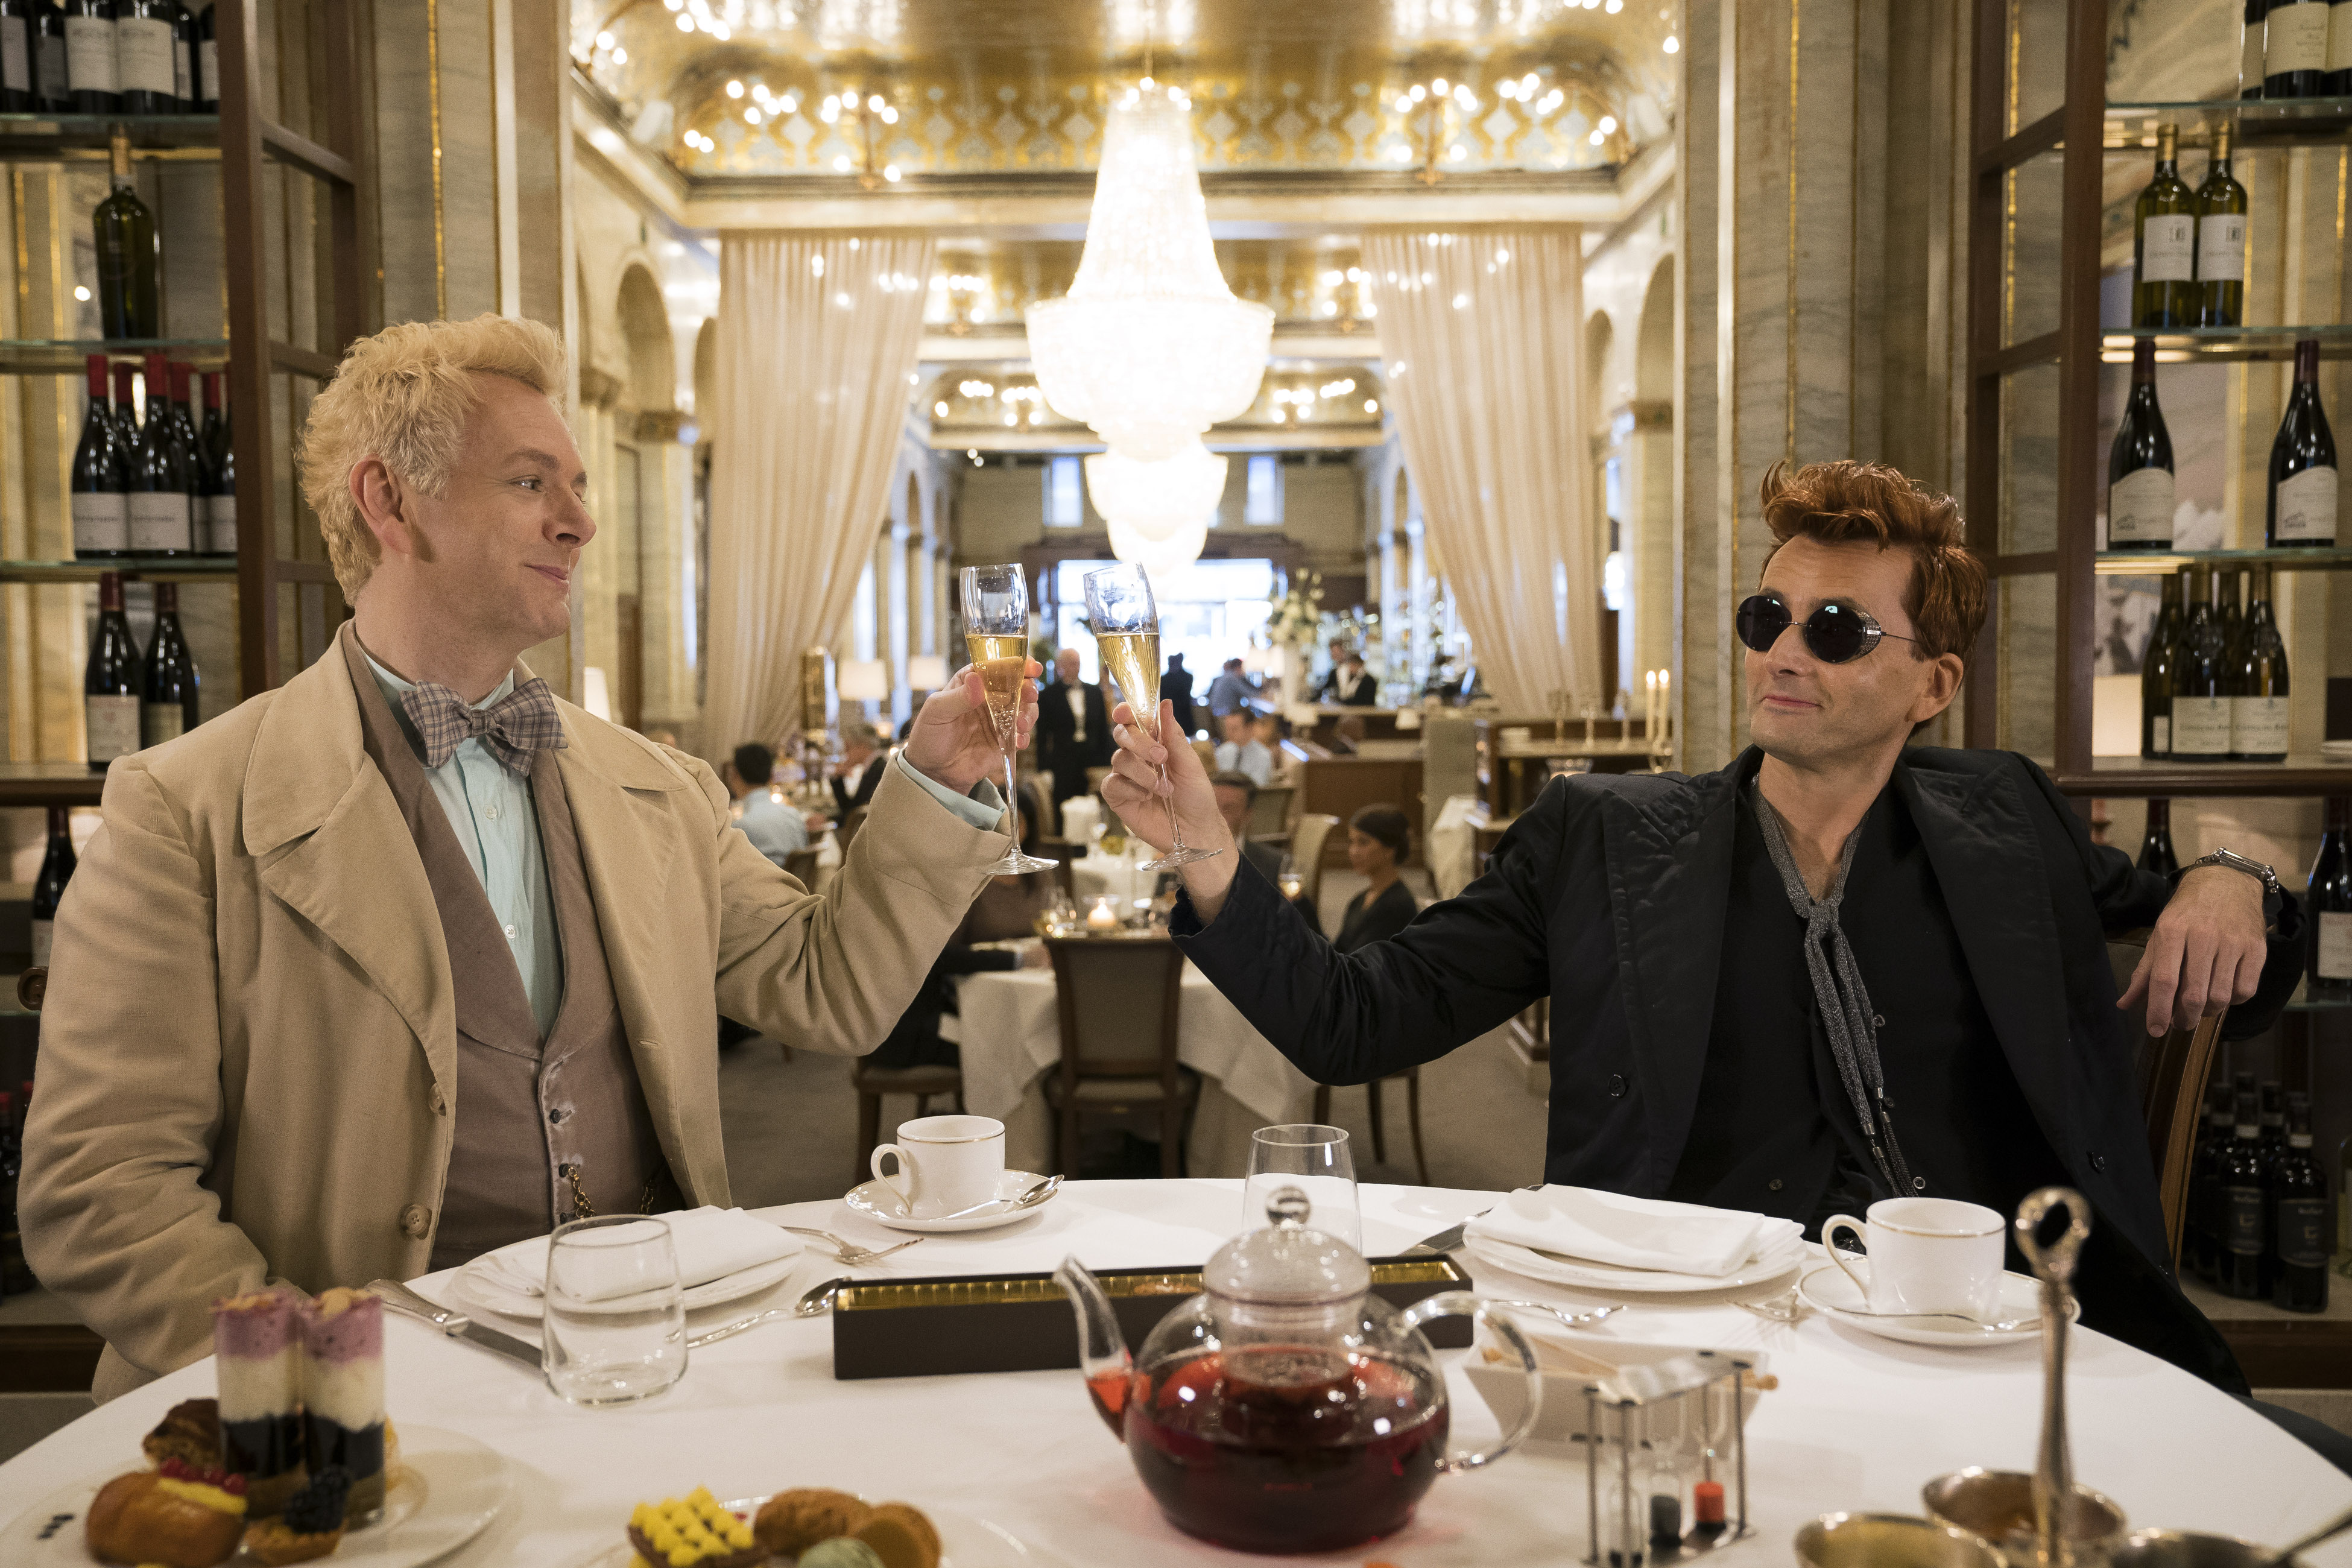 Michael Sheen in a white suit and David Tennant in a black suit in 'Good Omens' 